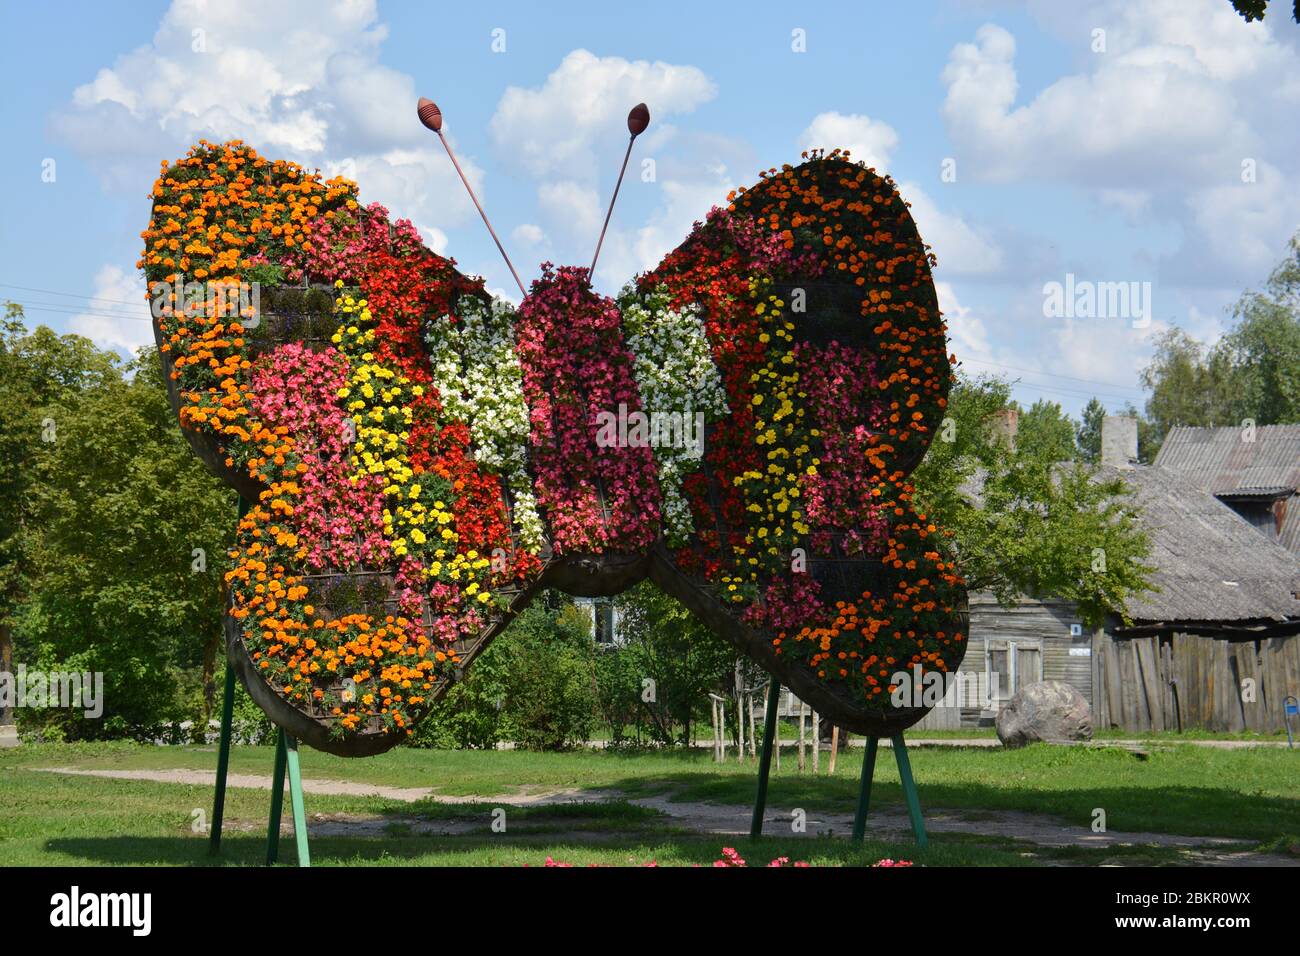 big butterfly symbol decoration made of many flowers in street Stock Photo